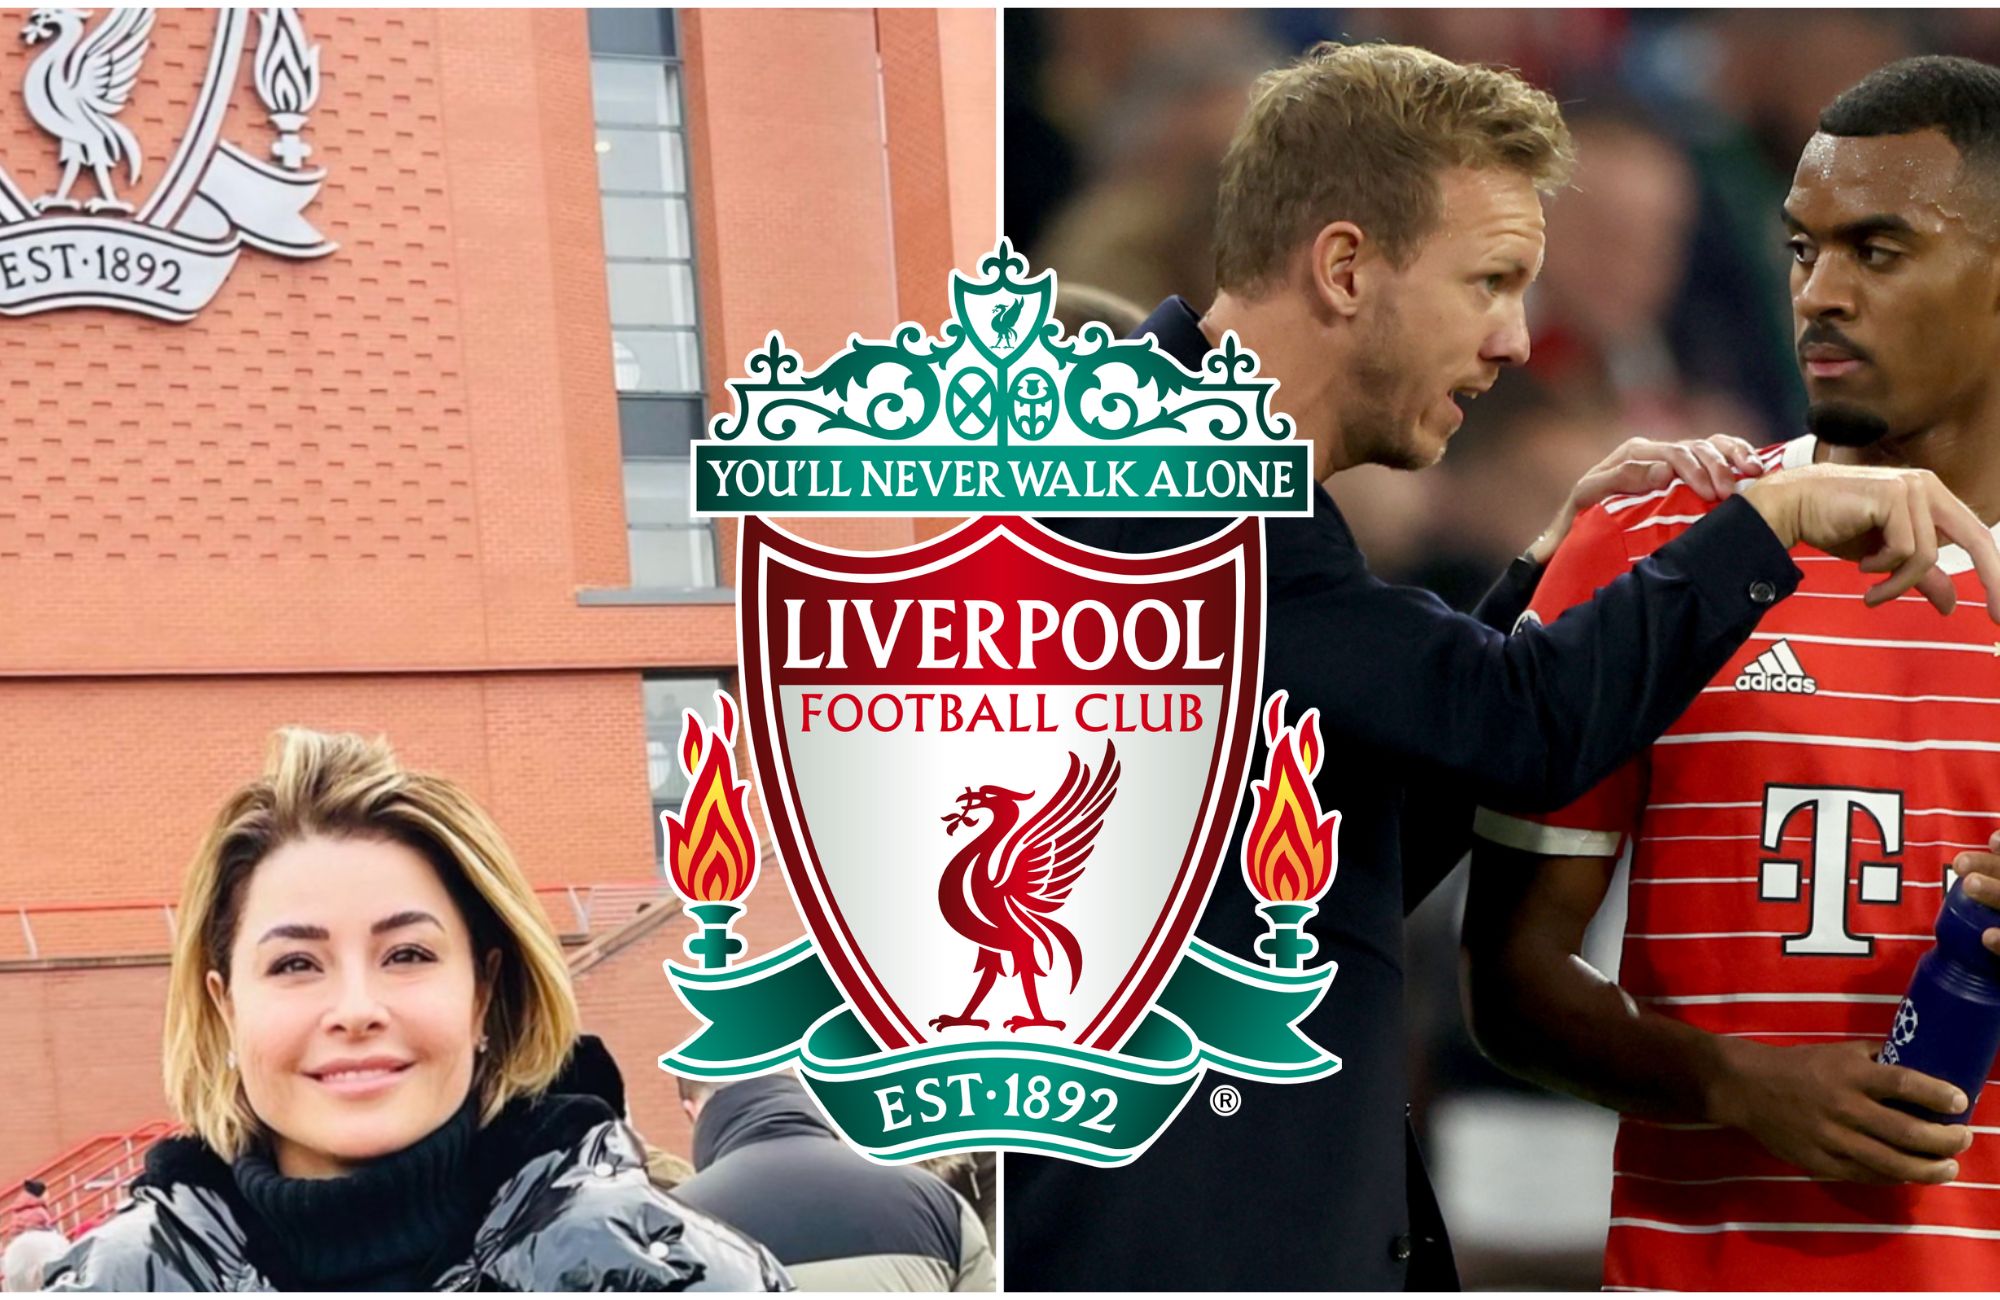 (Photo) Agent’s Anfield appearance hints Liverpool could still sign midfielder in January